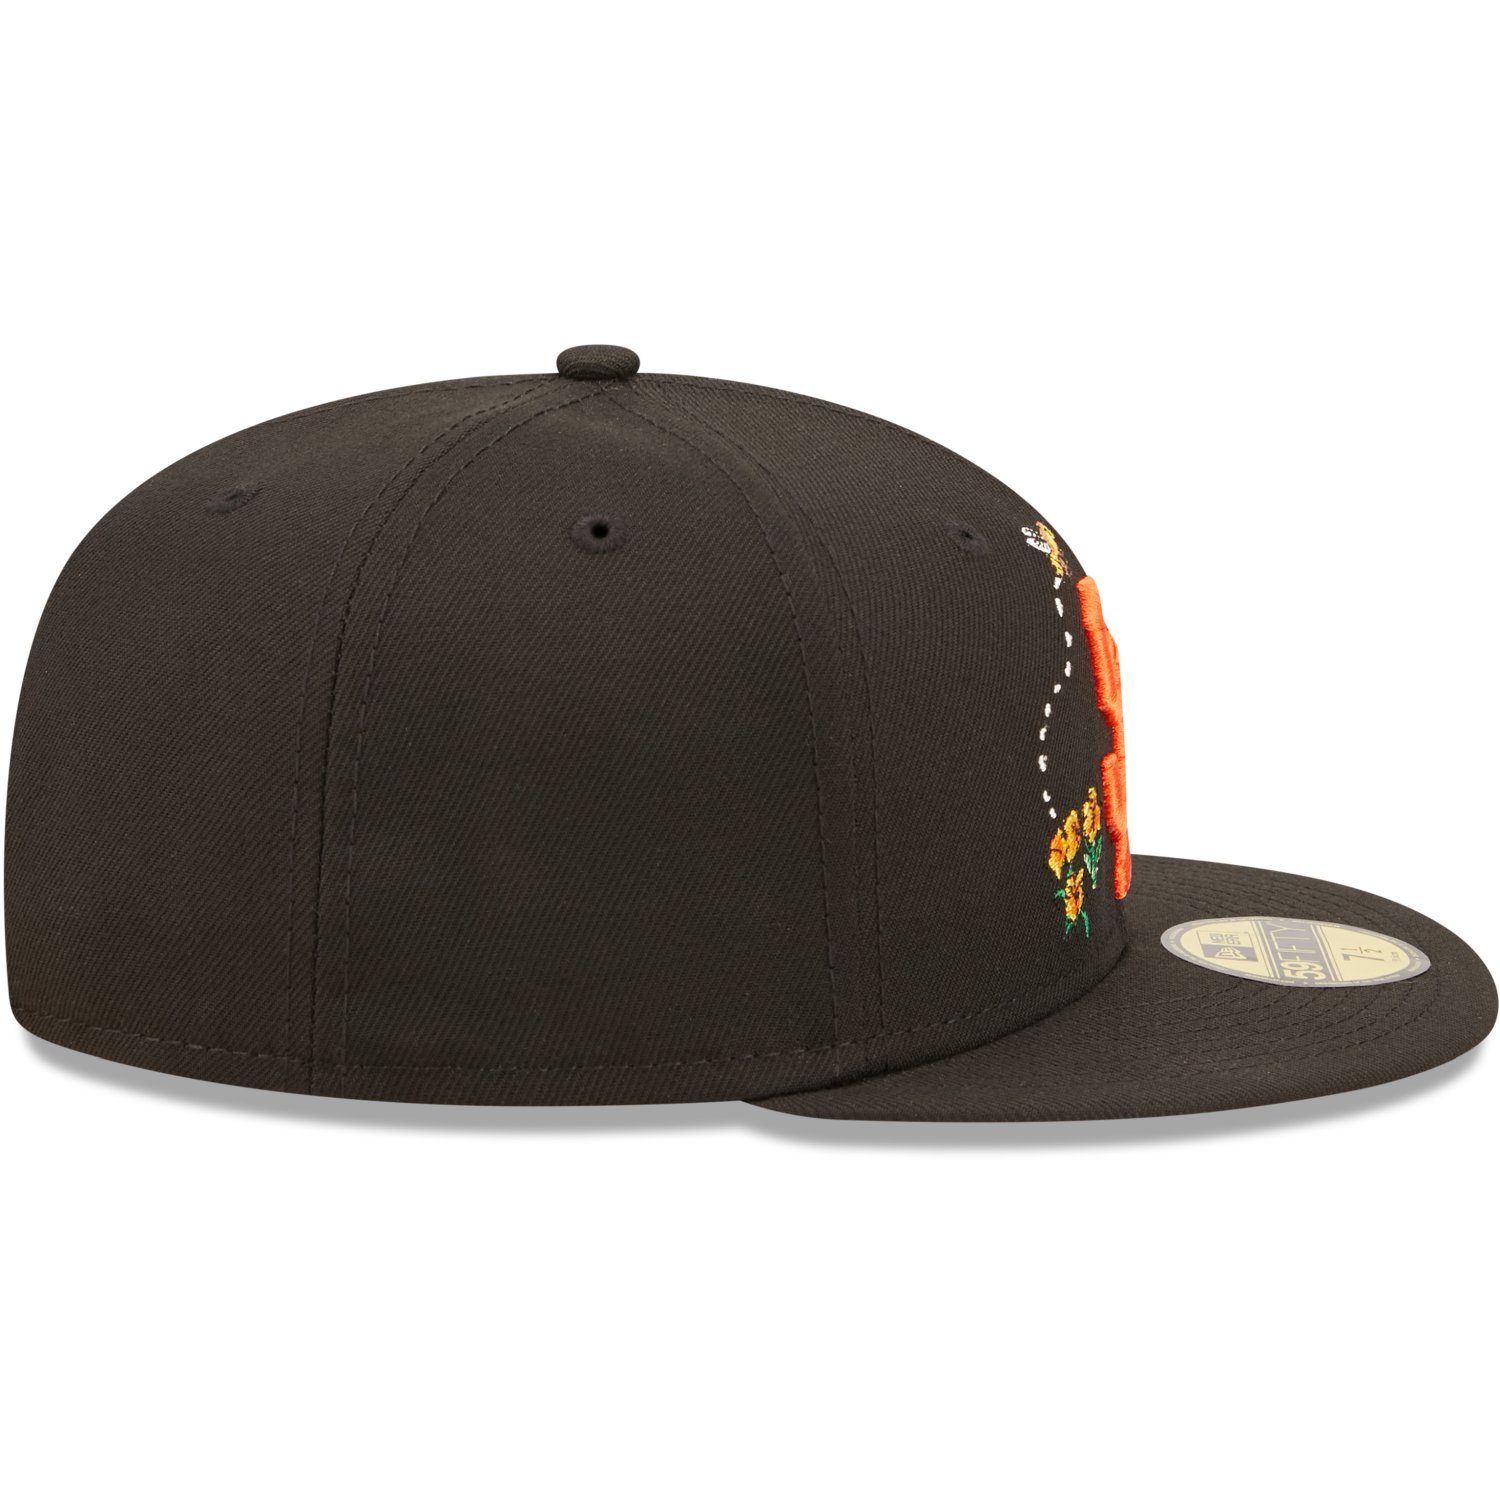 FLORAL New Giants Francisco WATER Era San 59Fifty Fitted Cap